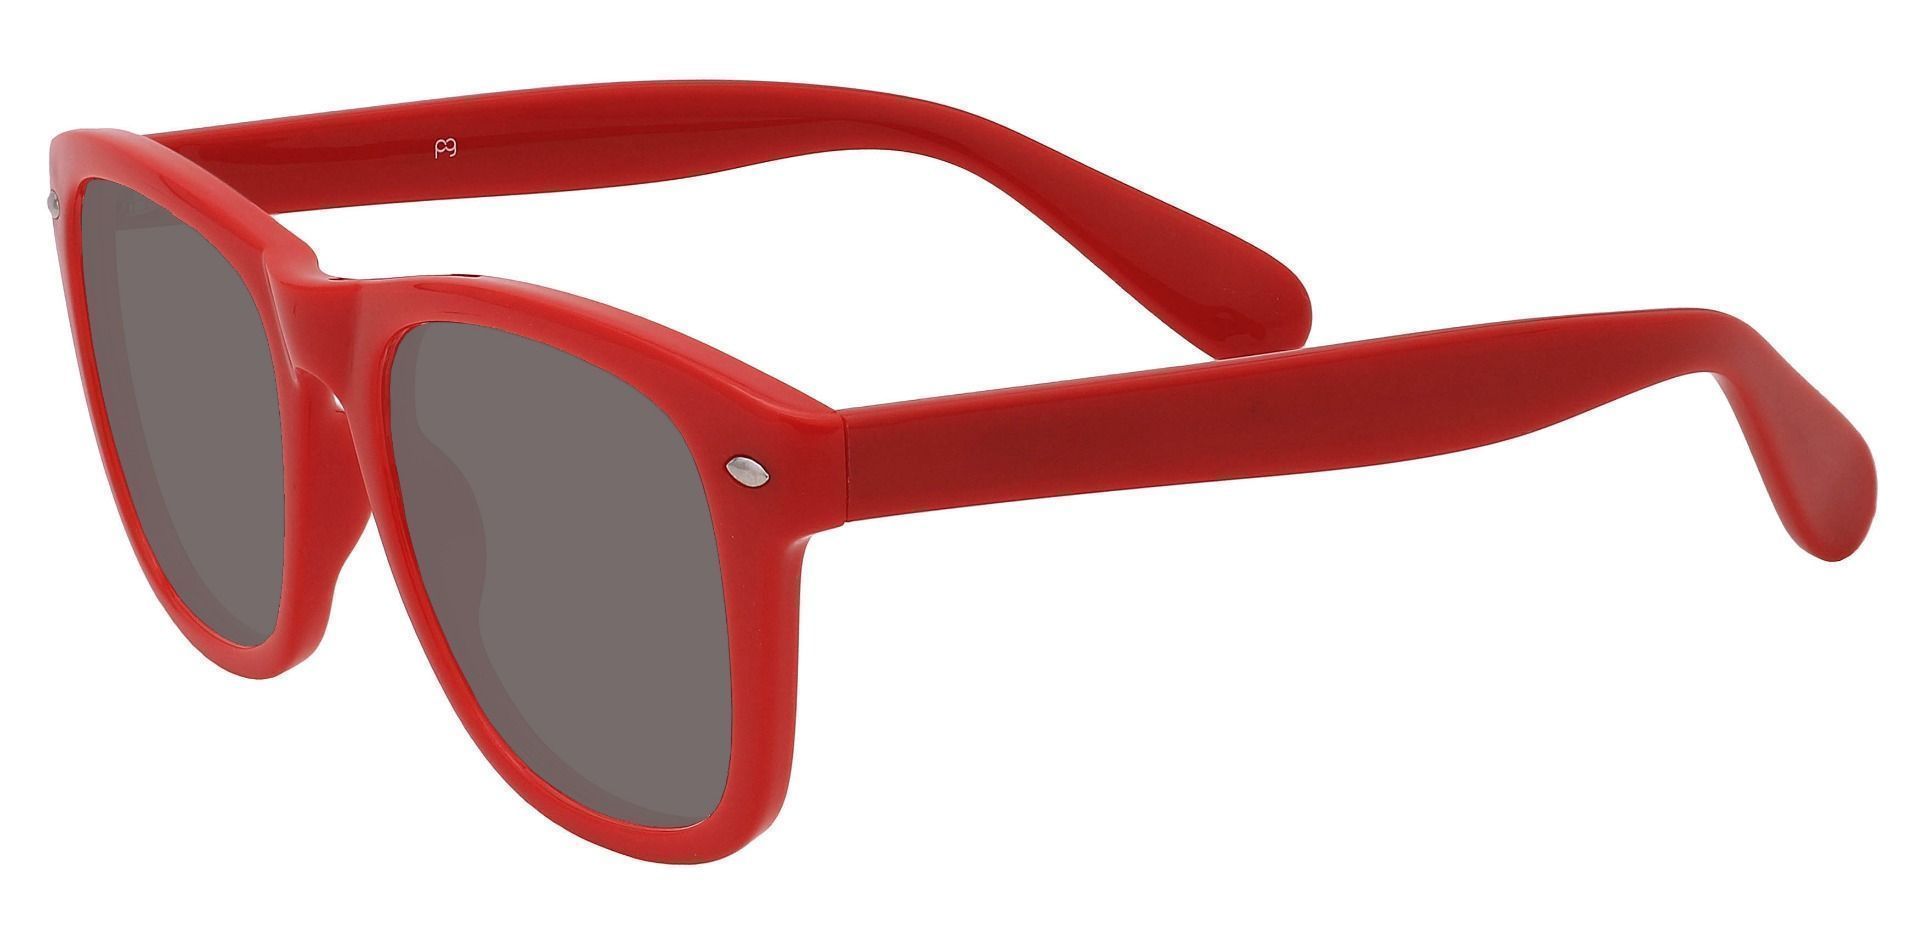 Yolanda Square Lined Bifocal Sunglasses - Red Frame With Gray Lenses